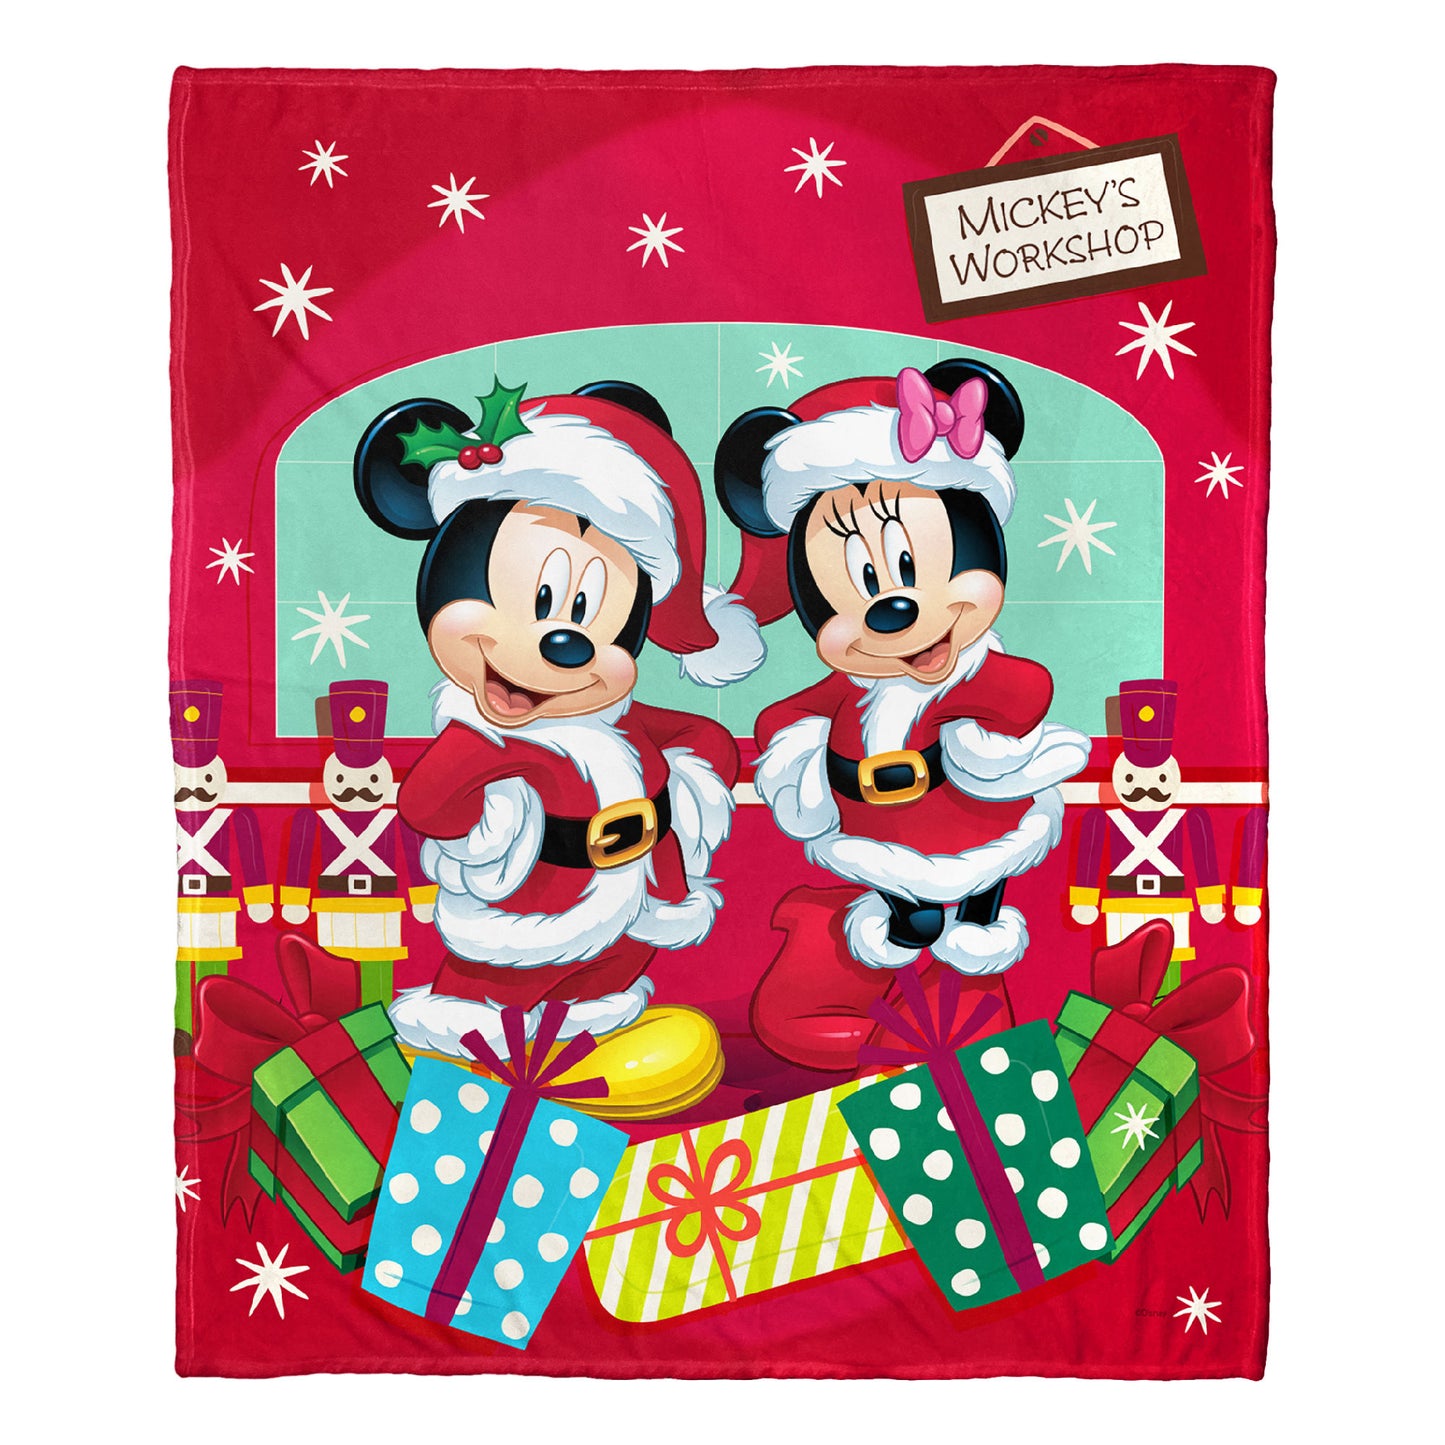 Mickey Mouse, Mickey Workshop Throw Blanket 50"x60"